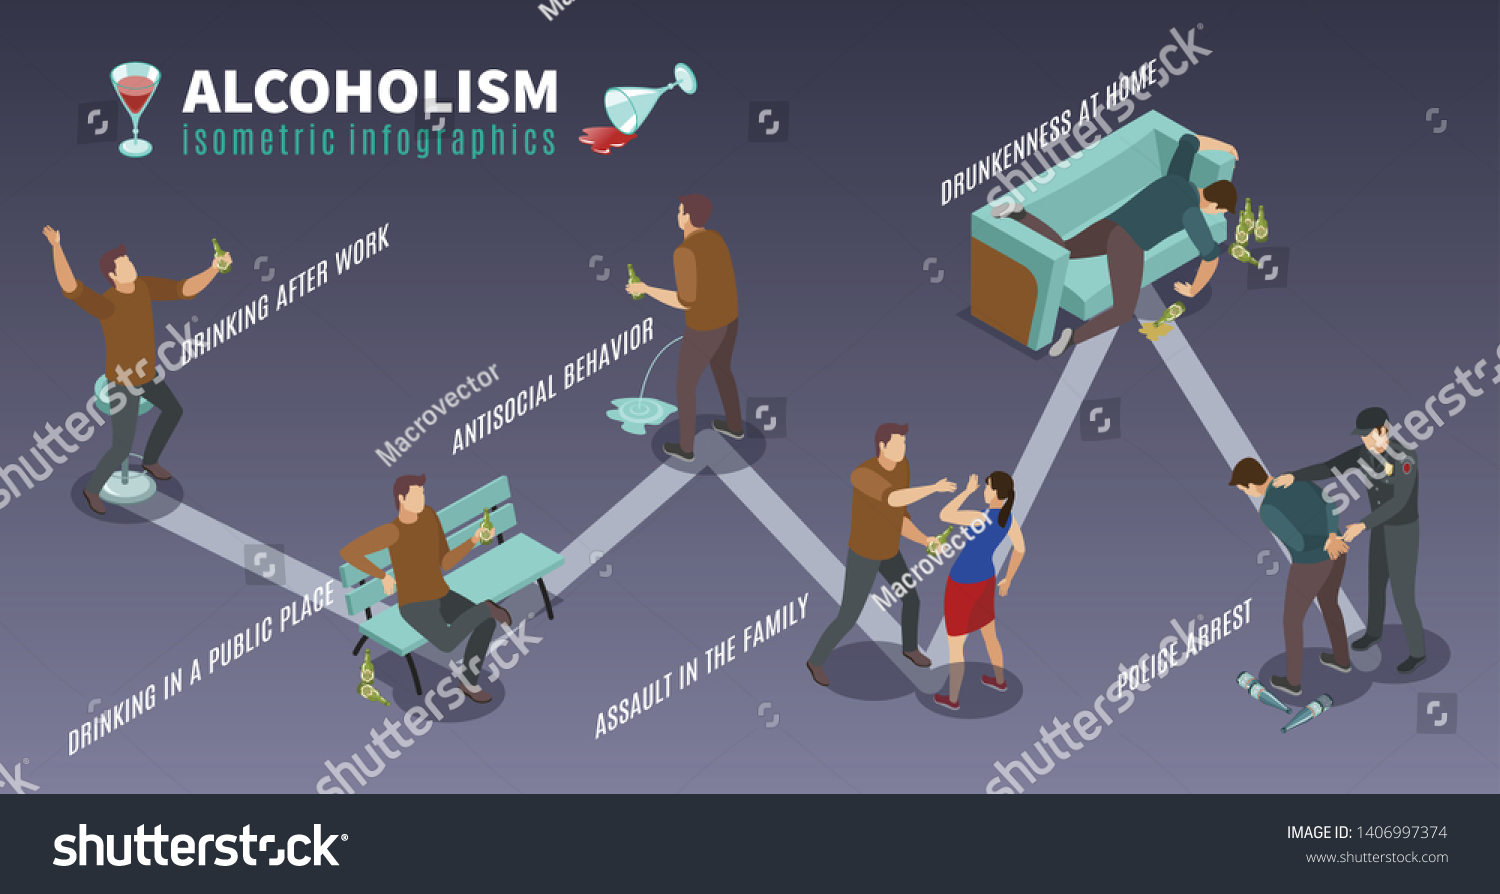 Alcoholism Isomeric Infographic Poster Heavy Drinking Stock Vector Royalty Free 1406997374 6864